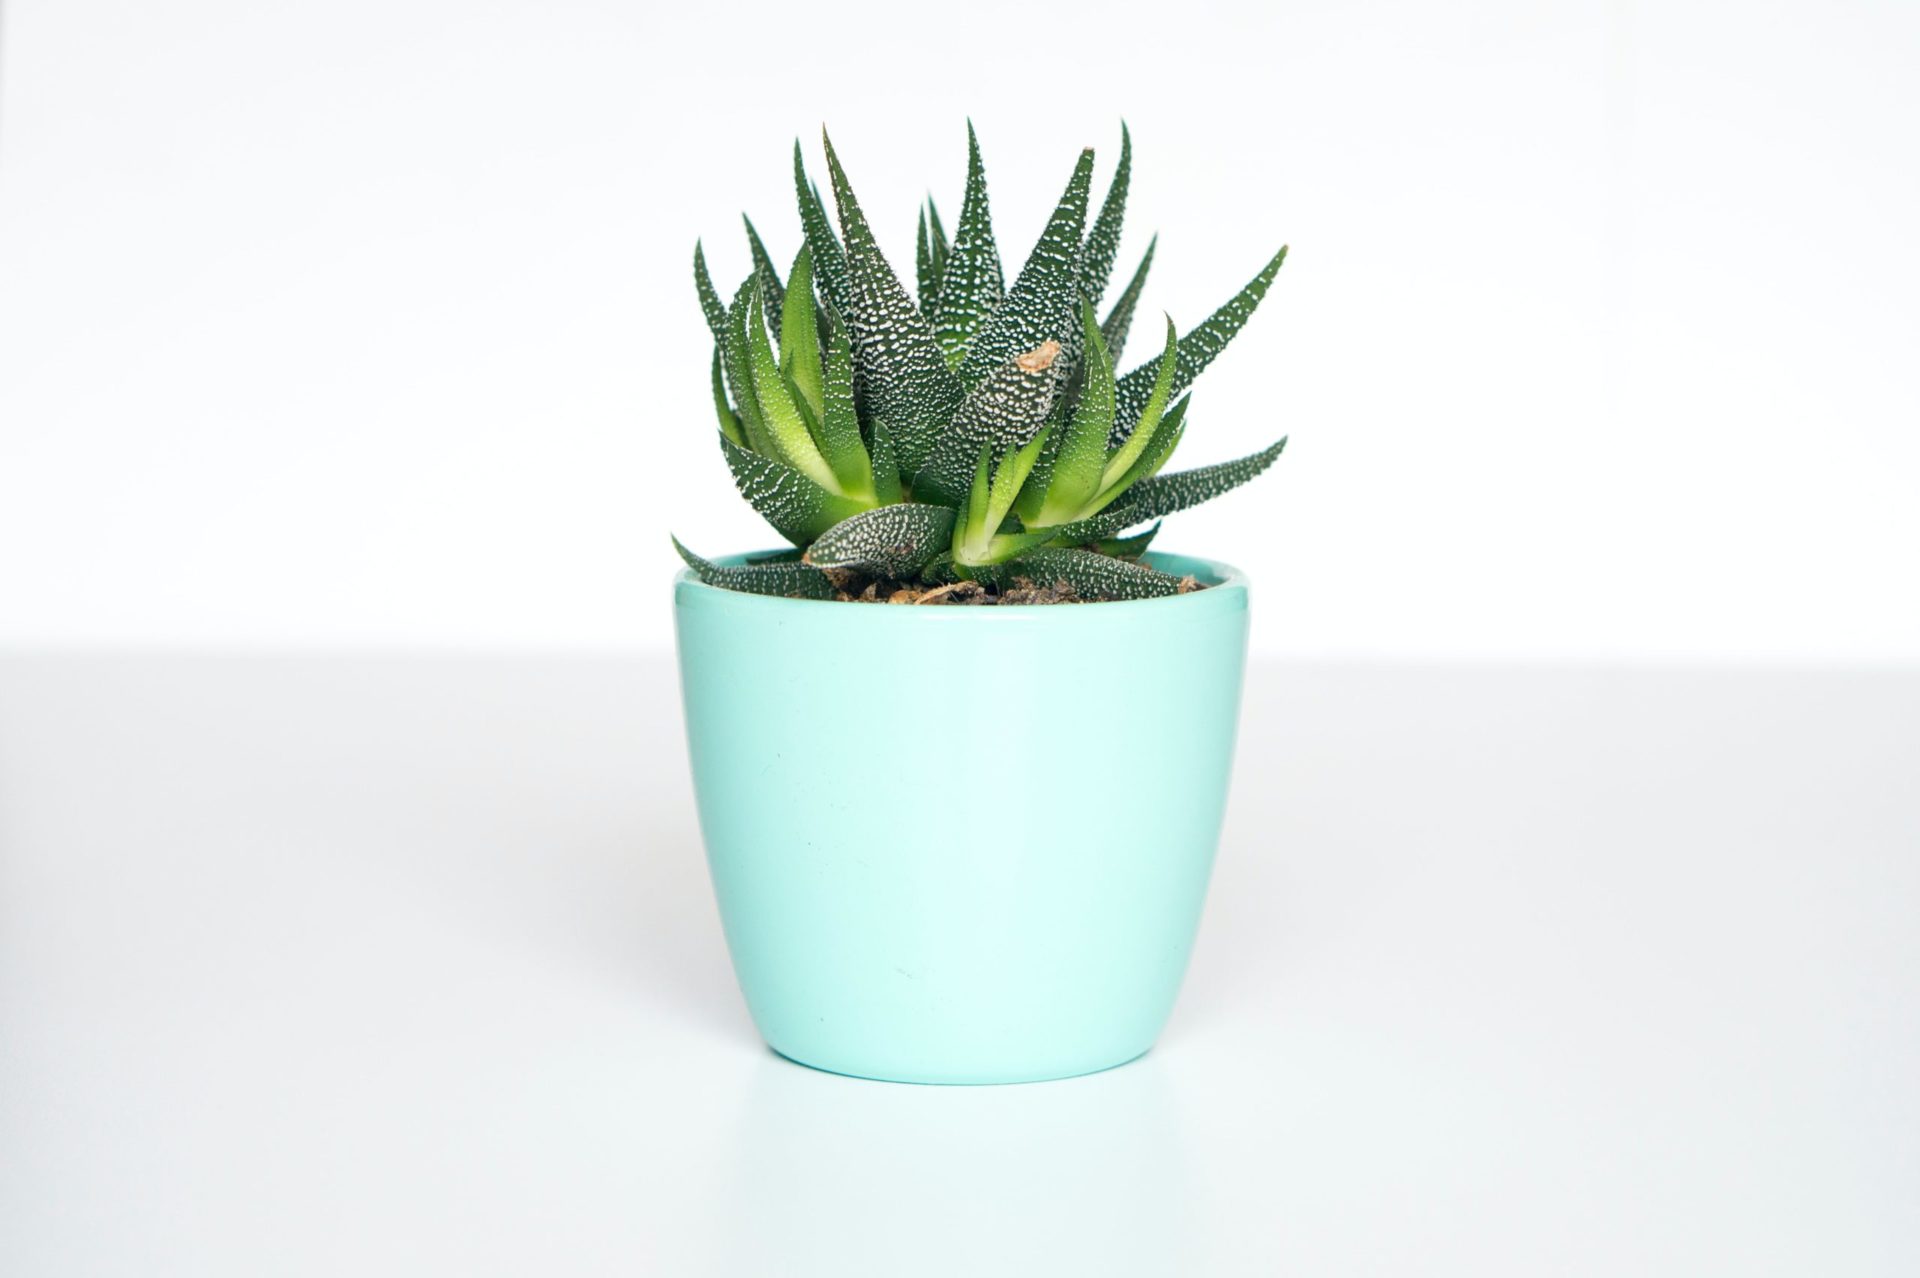 A succulent rests in a light blue planter on a white surface with a white background.